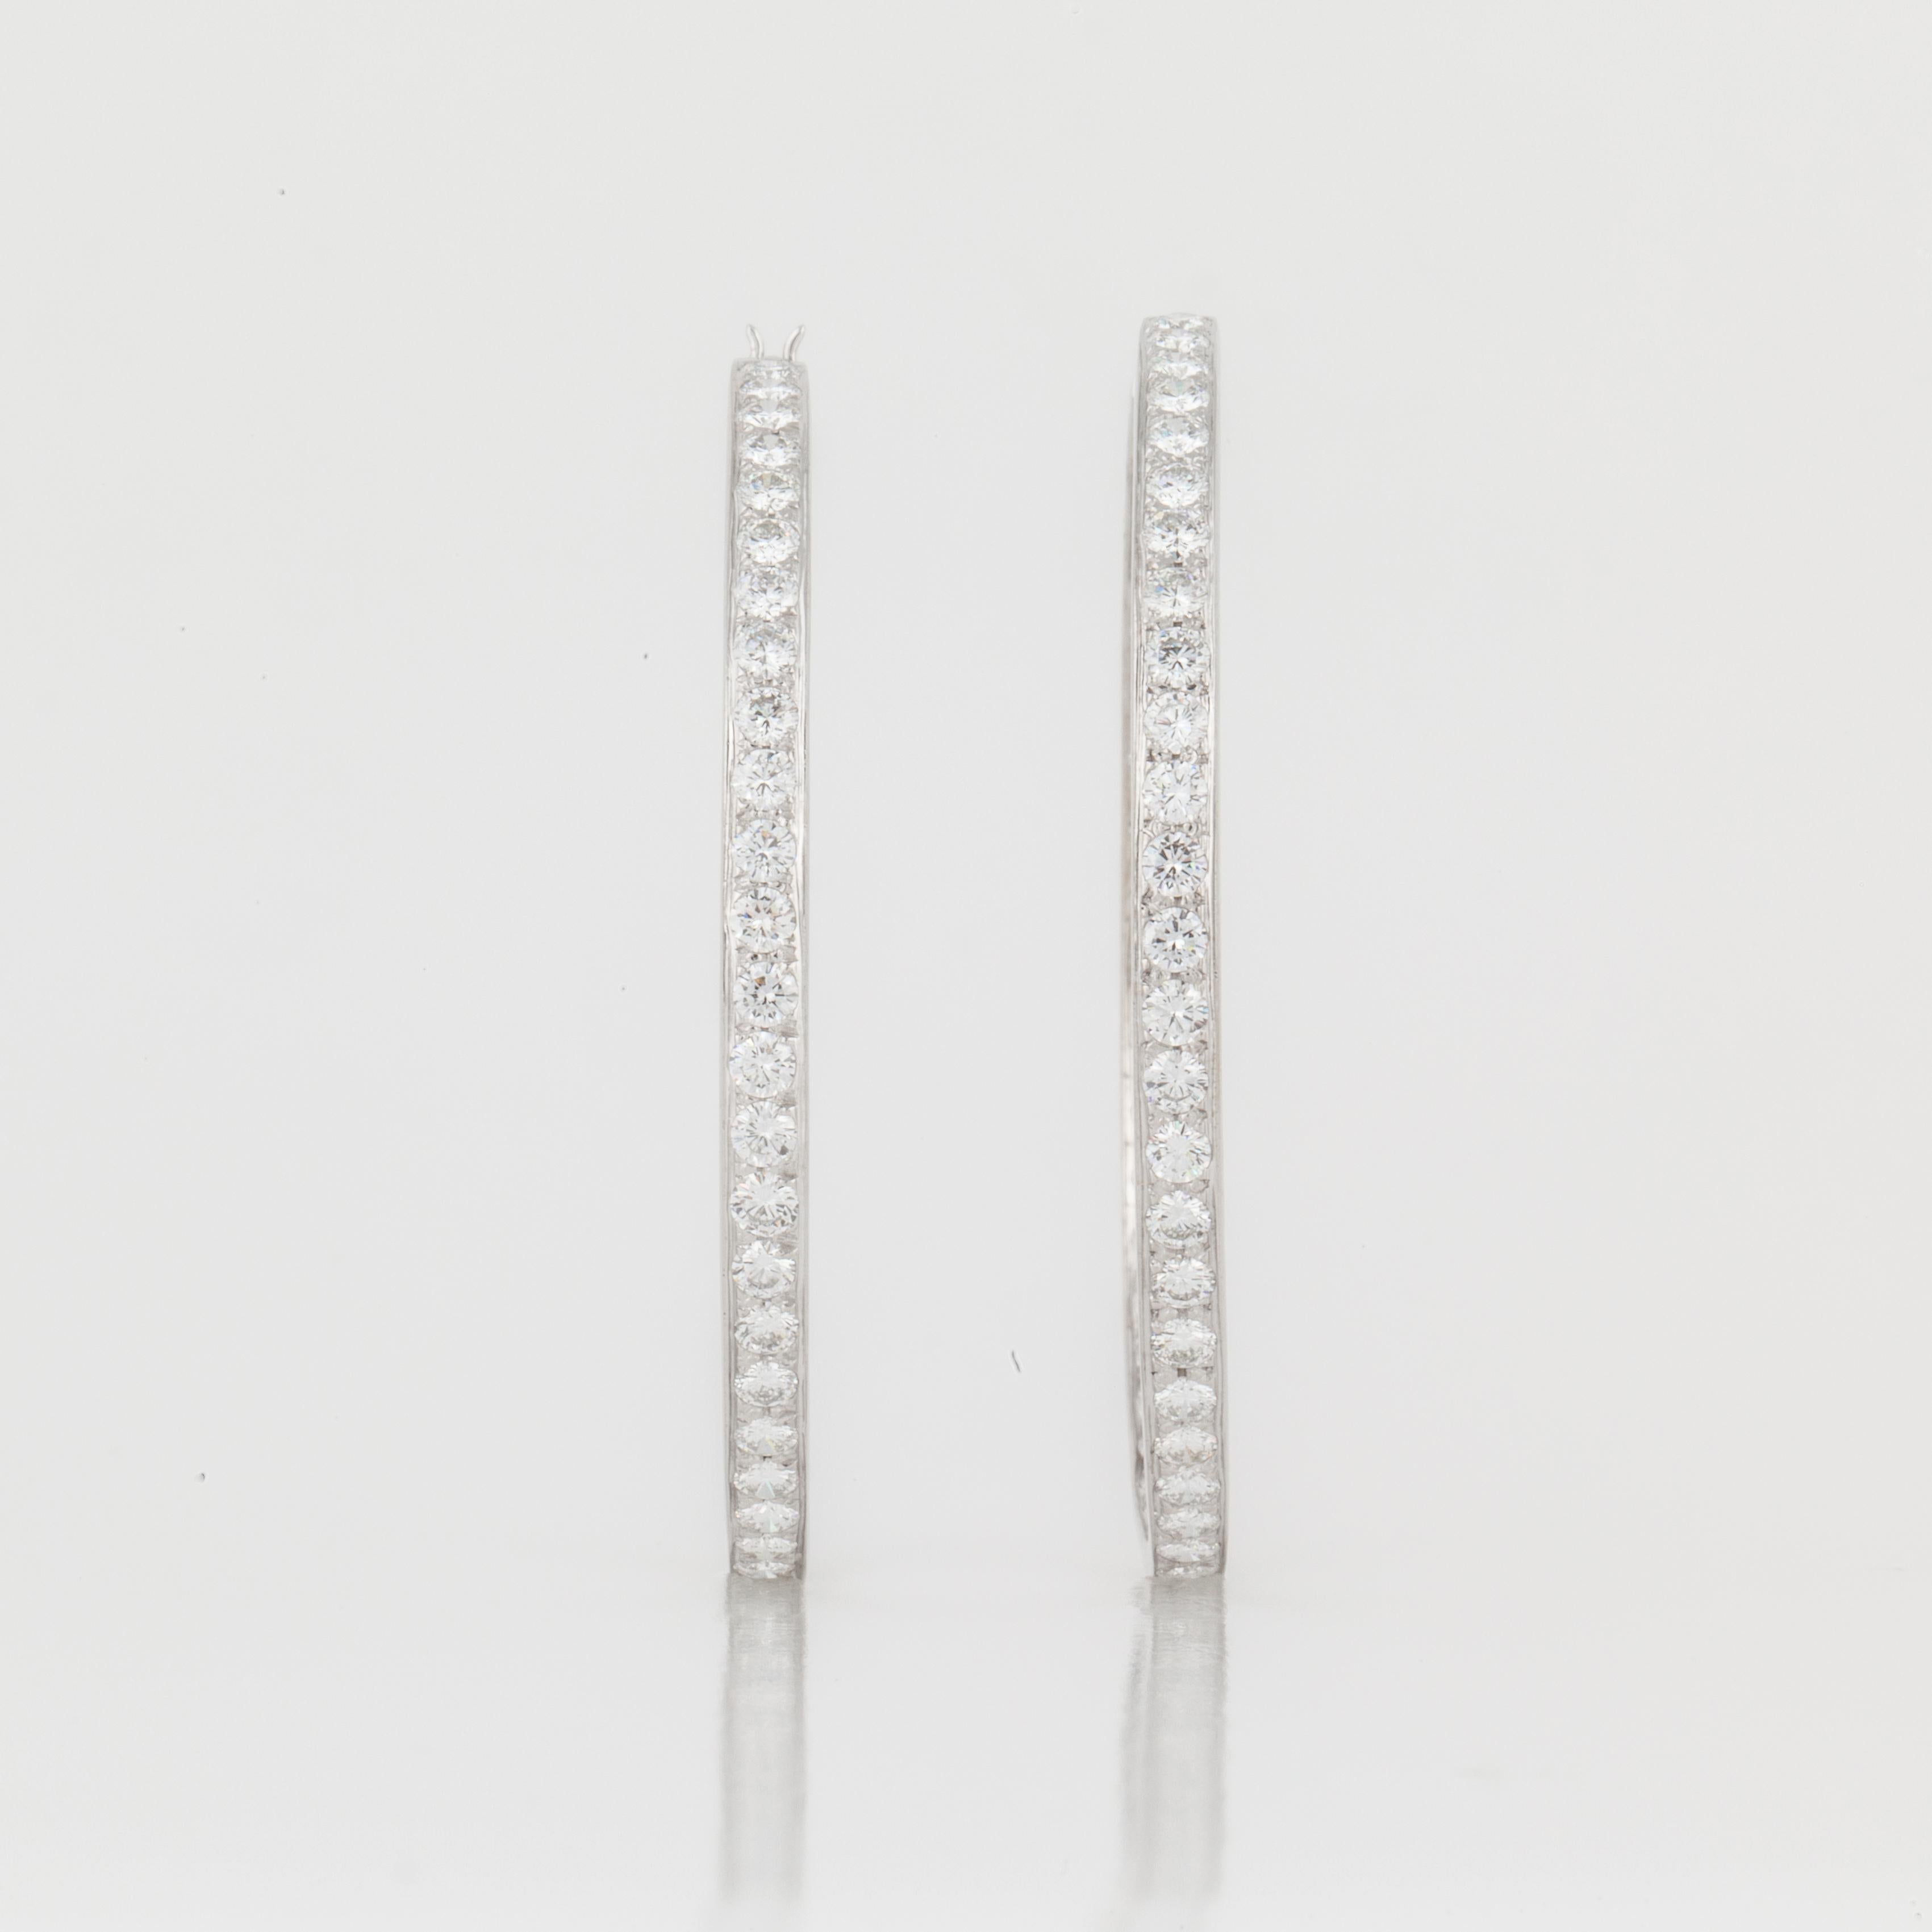 18K white gold inside/outside diamond hoop earrings.  There are a total of 94 round diamonds that total 7.50 carats; F-H color and VVS2-VS1 clarity.  Measure 2 inches in diameter and 1/8 inches wide.  For pierced ears.